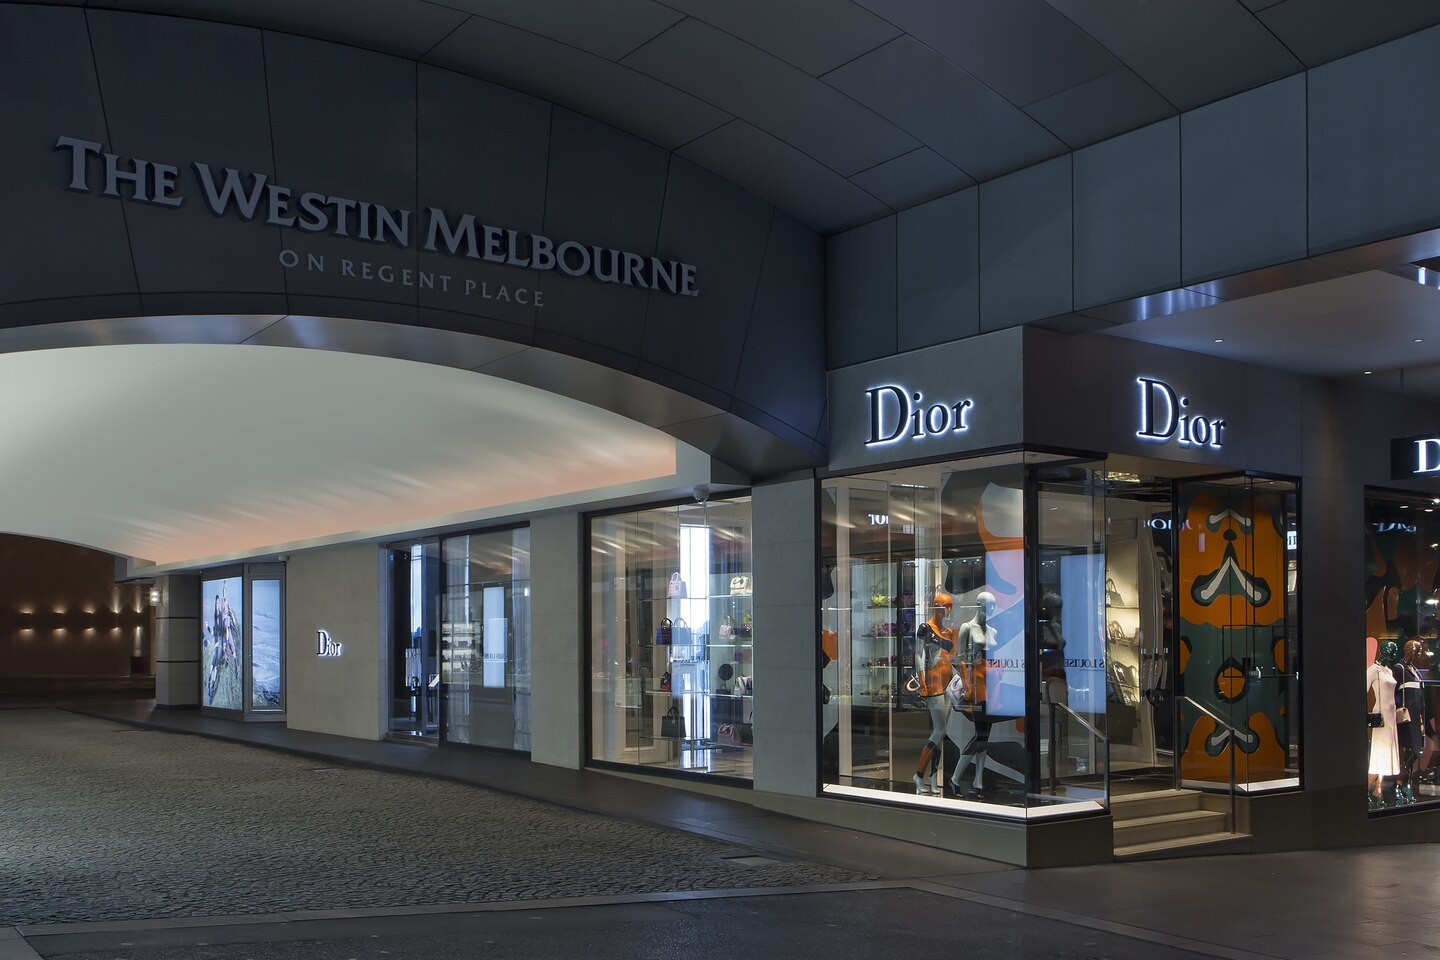 Plans to quarantine Australian Open players at the Westin Melbourne have been cancelled ©Marriott Hotels